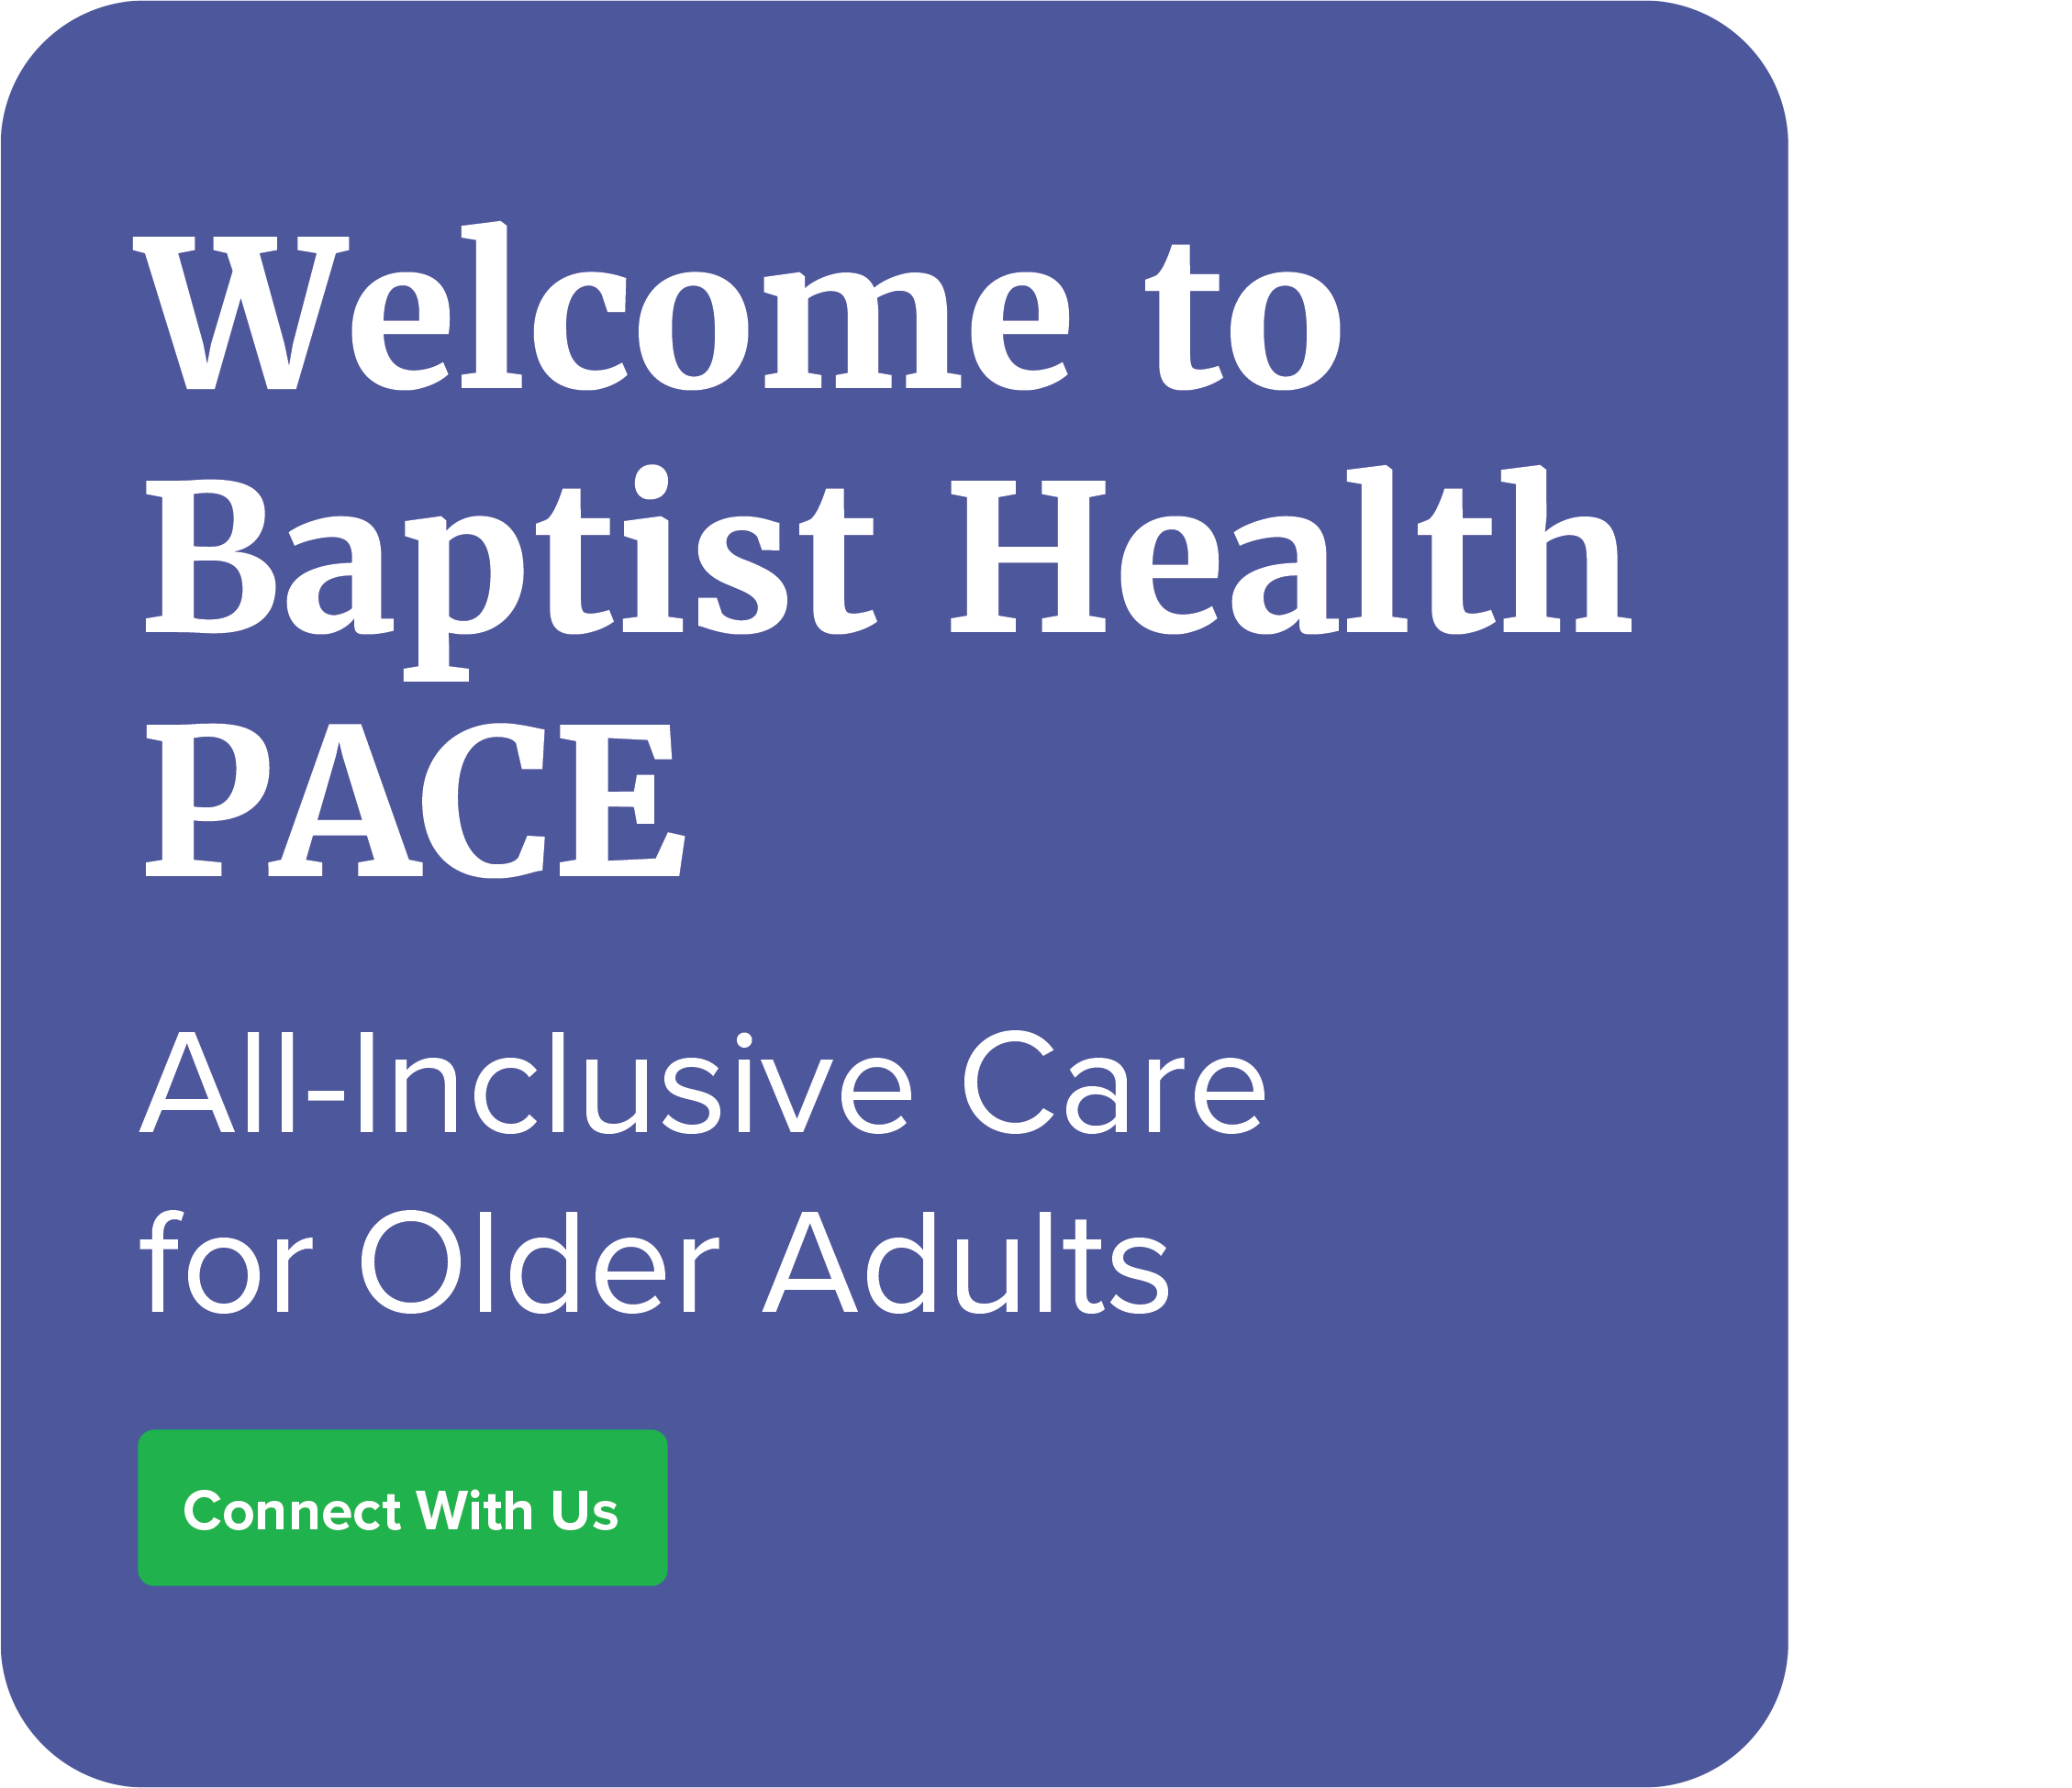 Welcome to Baptist Health PACE - Connect With Us